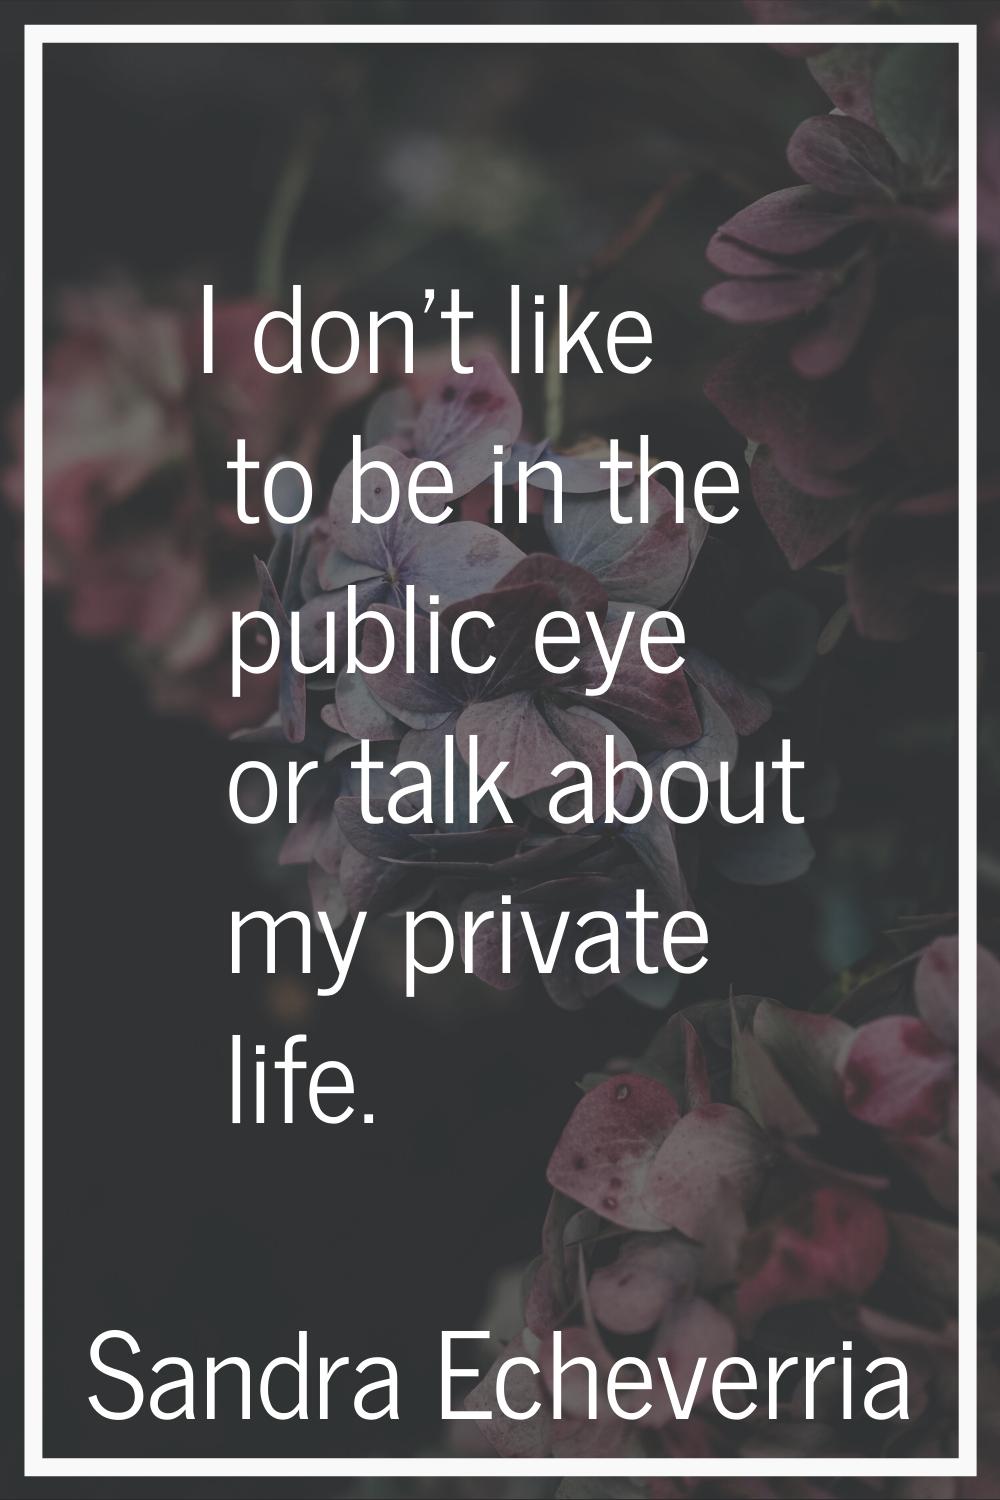 I don't like to be in the public eye or talk about my private life.